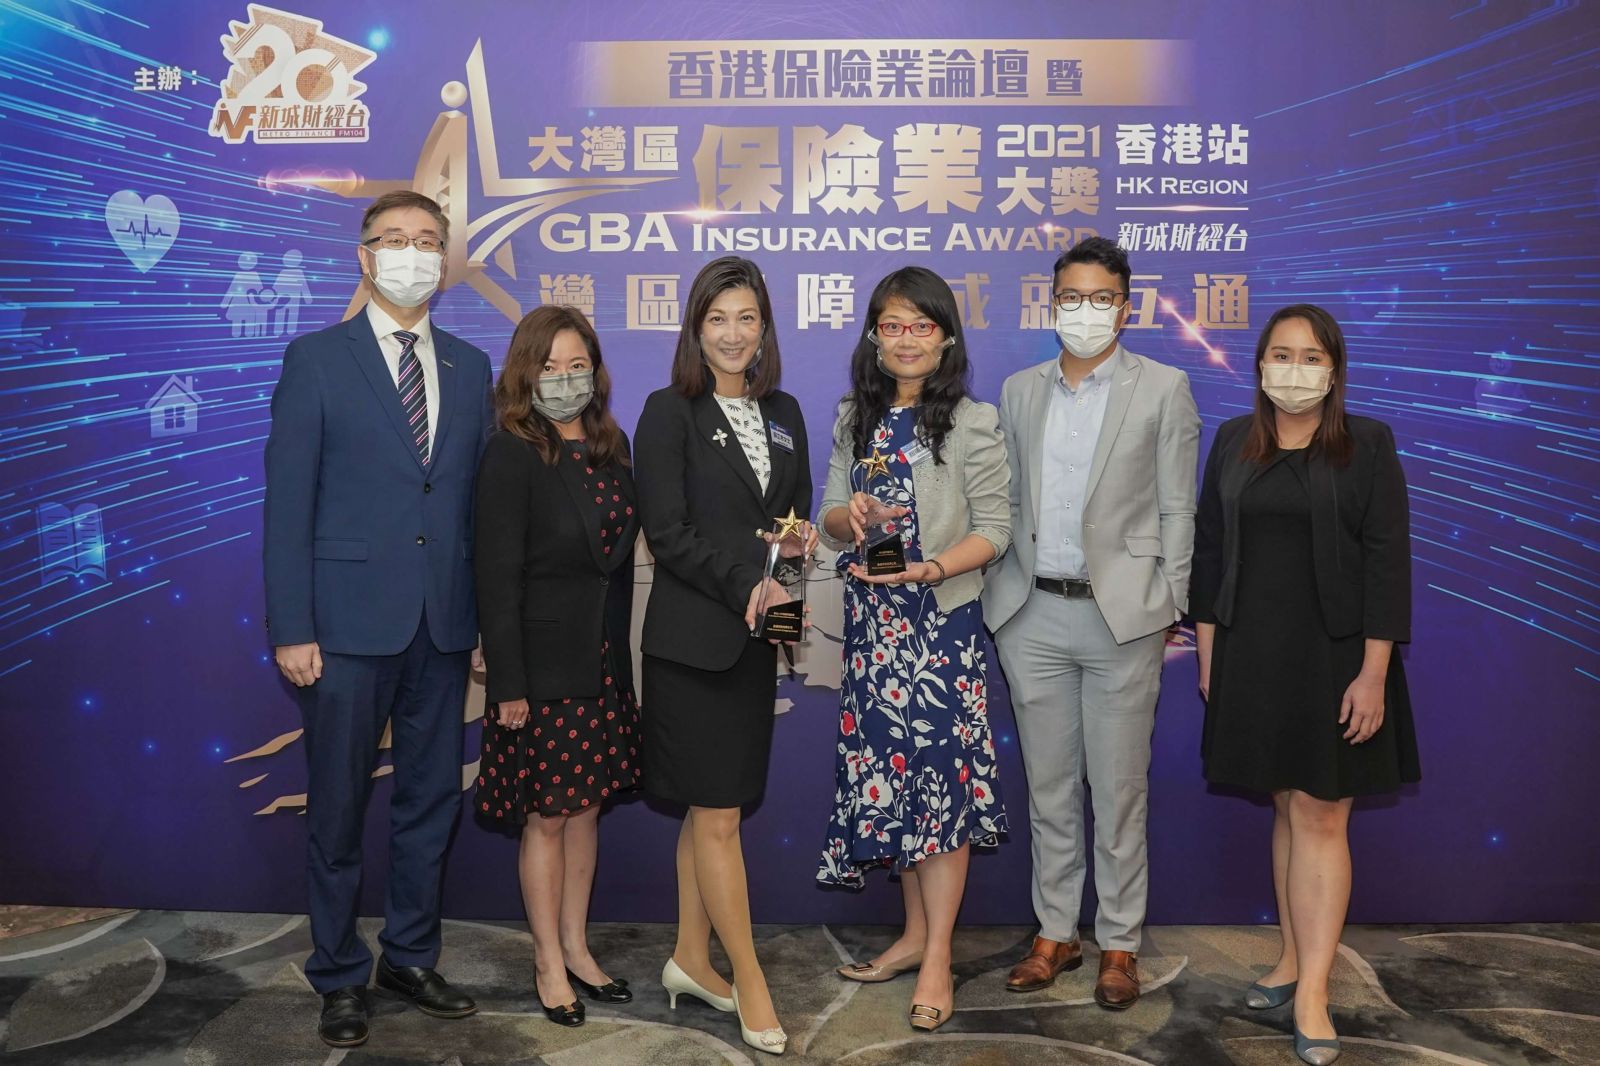 FTLife garners two accolades in the Metro Finance “GBA Insurance Awards 2021 – Hong Kong Region”